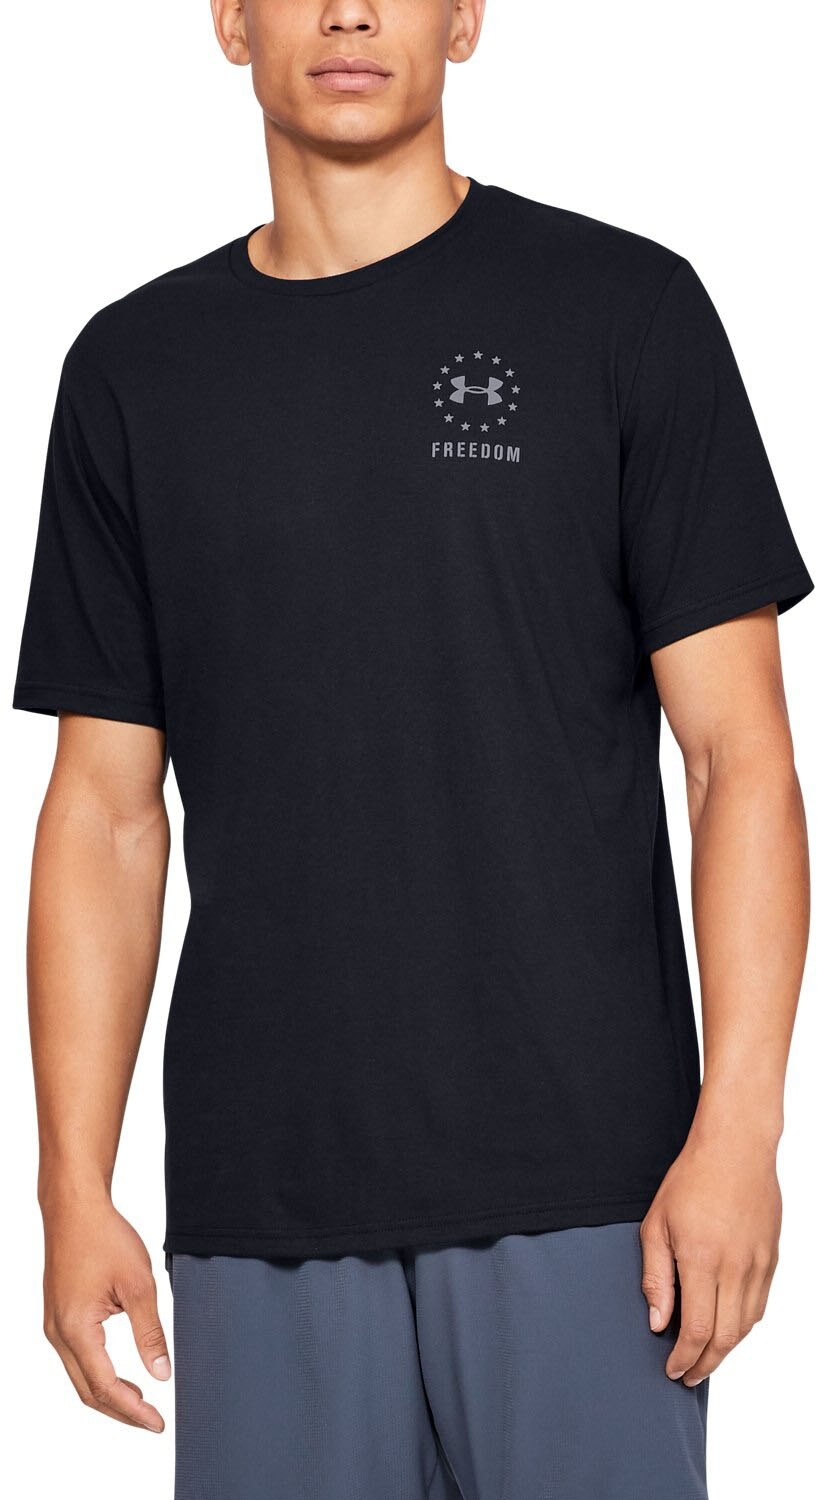 Under Armour Freedom Left Chest T-Shirt